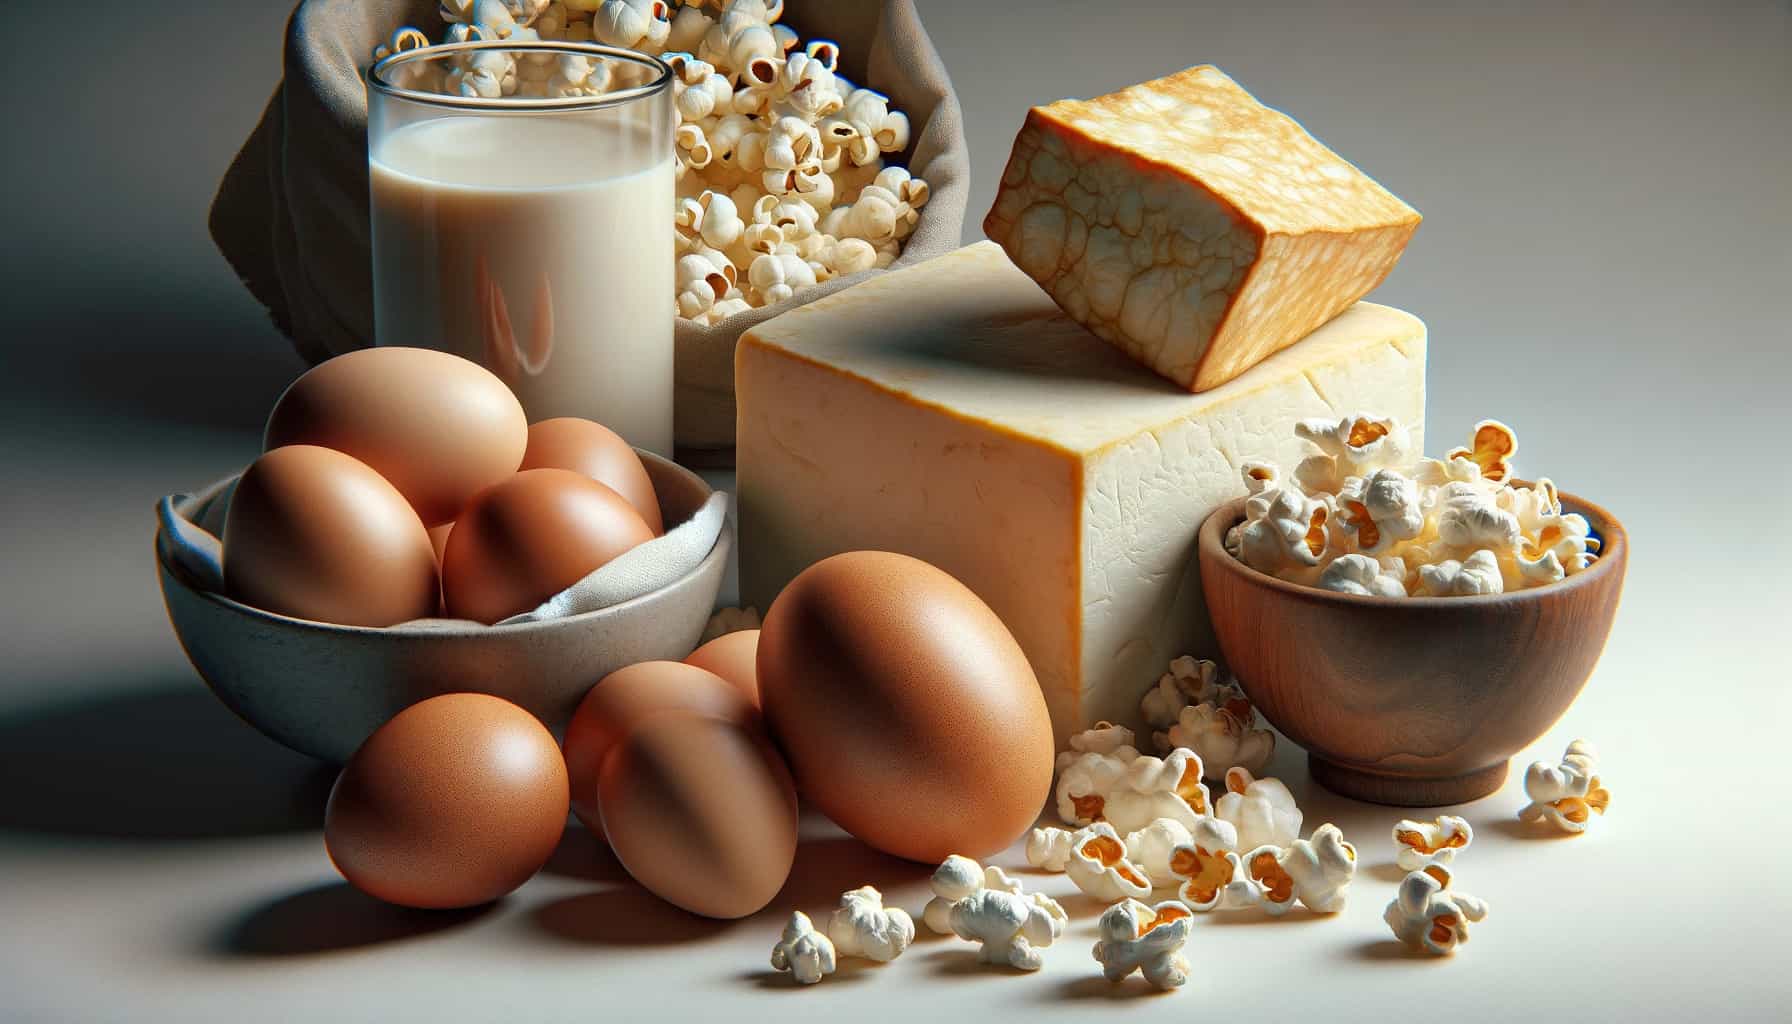 Eggs, tofu, and air-popped popcorn